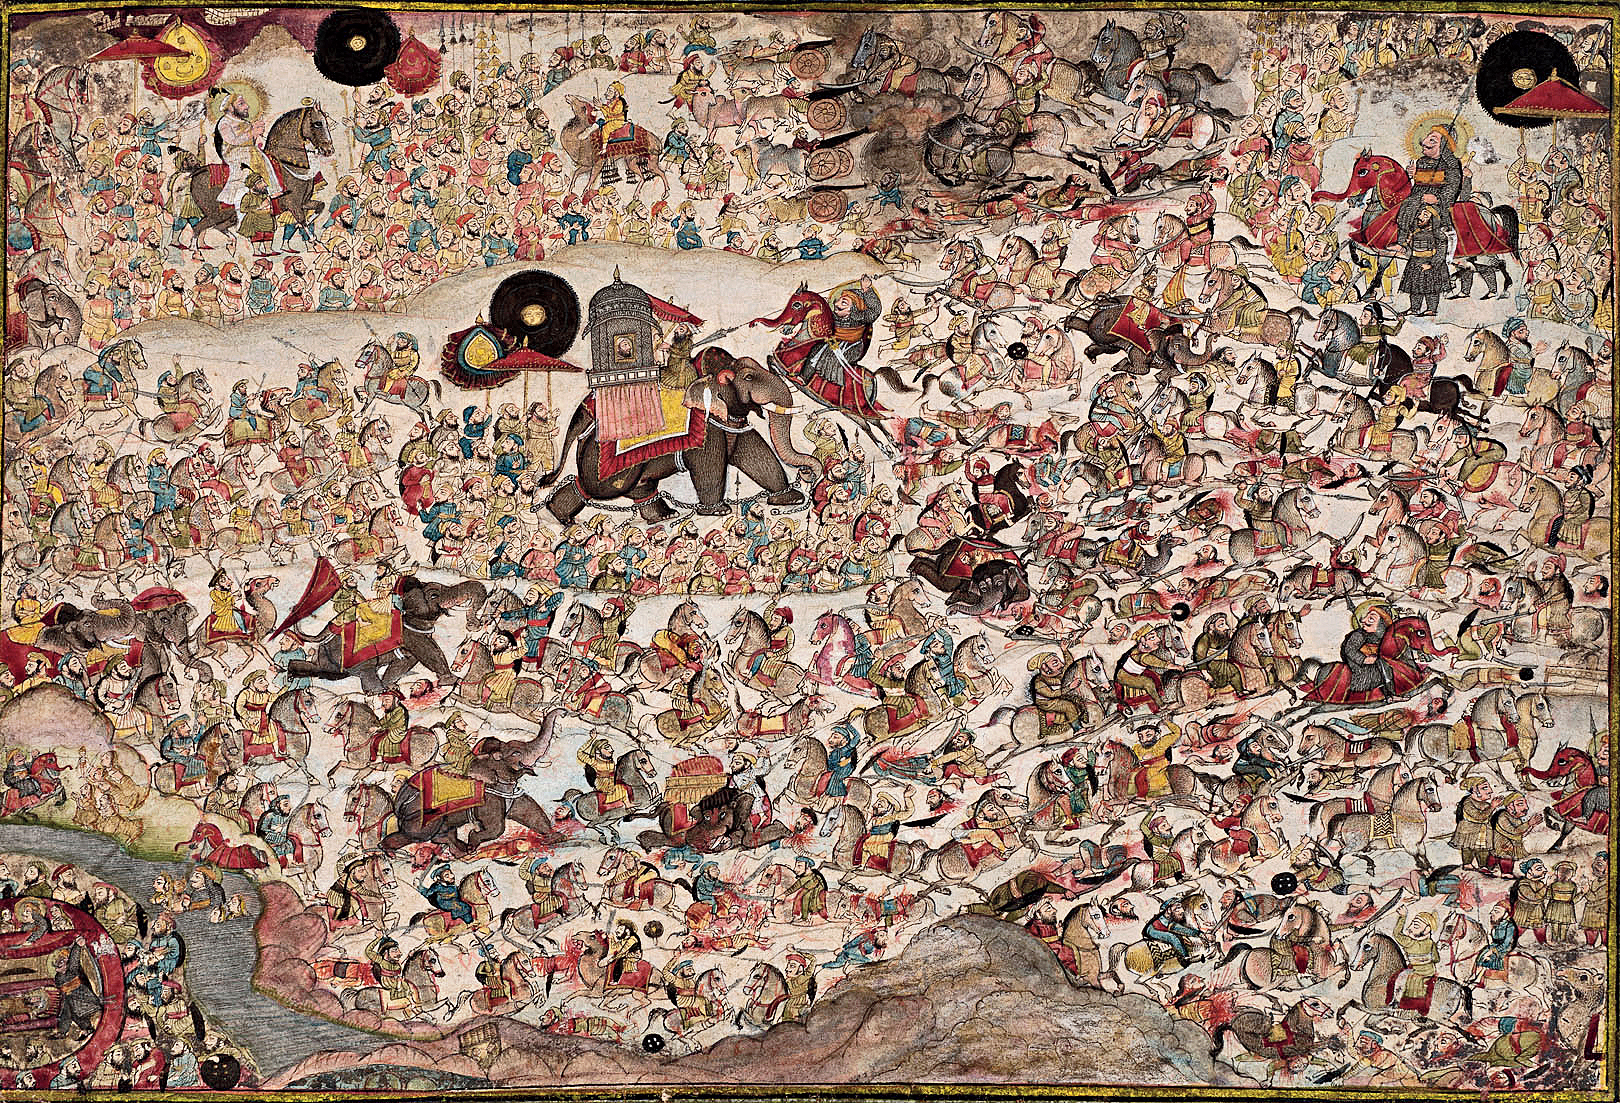 Detail from a painting attributed to Chokha depicting the Battle of Haldighati (1576) between the troops of Rana of Mewar and the Mughal Emperor, Akbar, led by Raja Man Singh of Amber